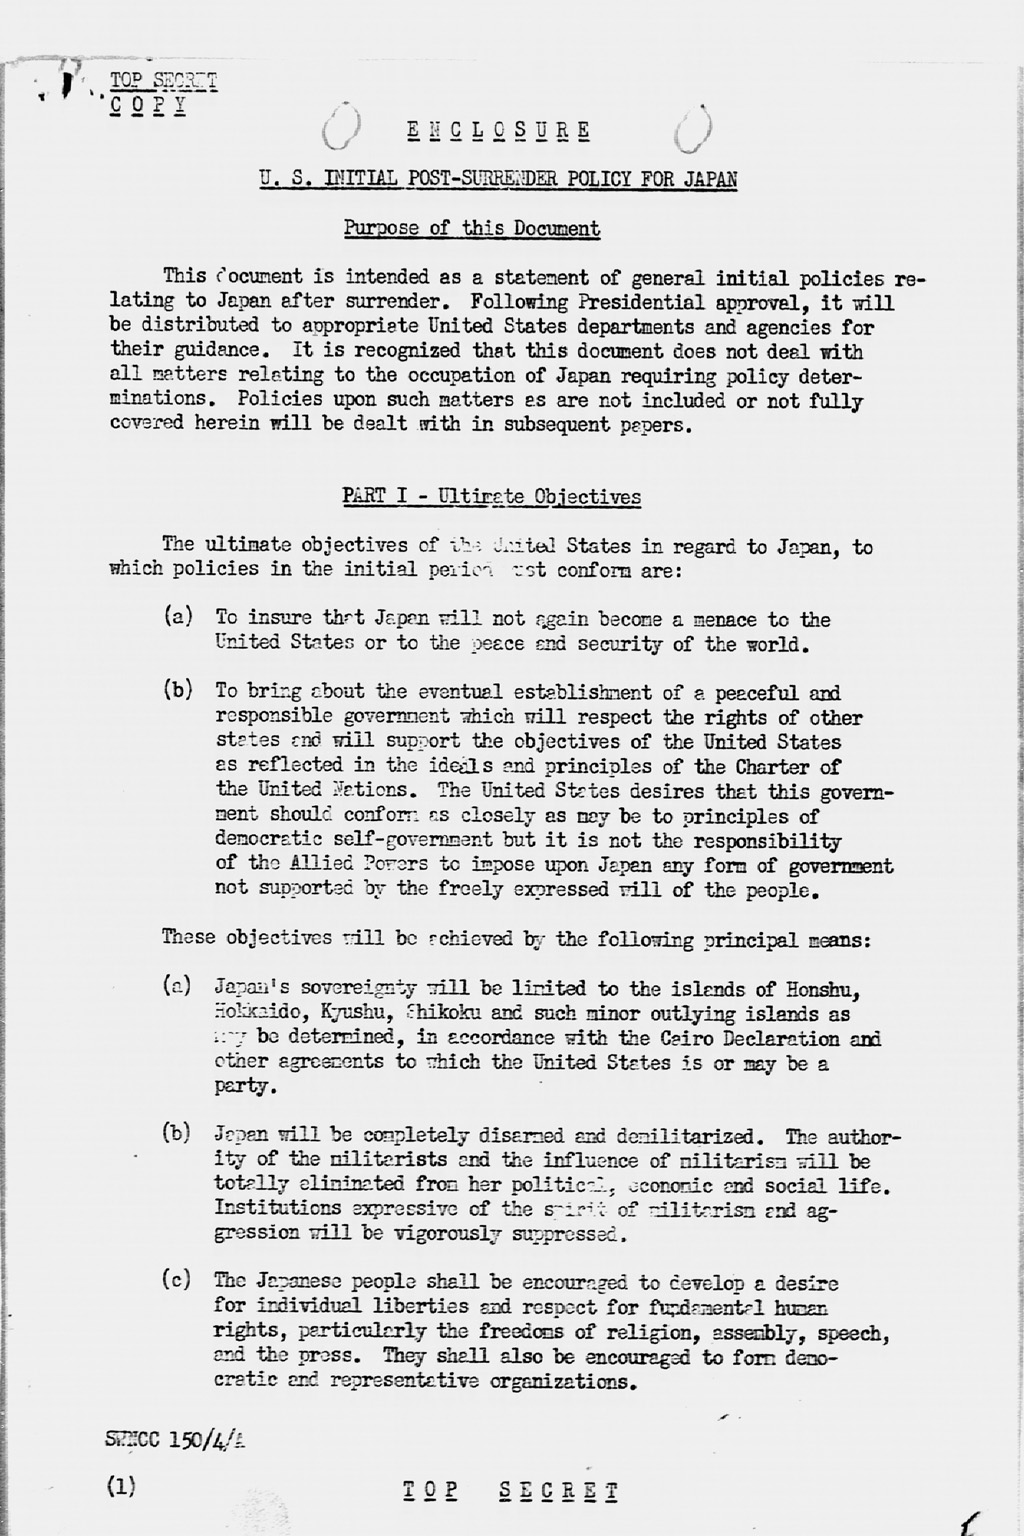 [U.S. Initial Post-Surrender Policy for Japan (SWNCC150/4/A)](Larger image)